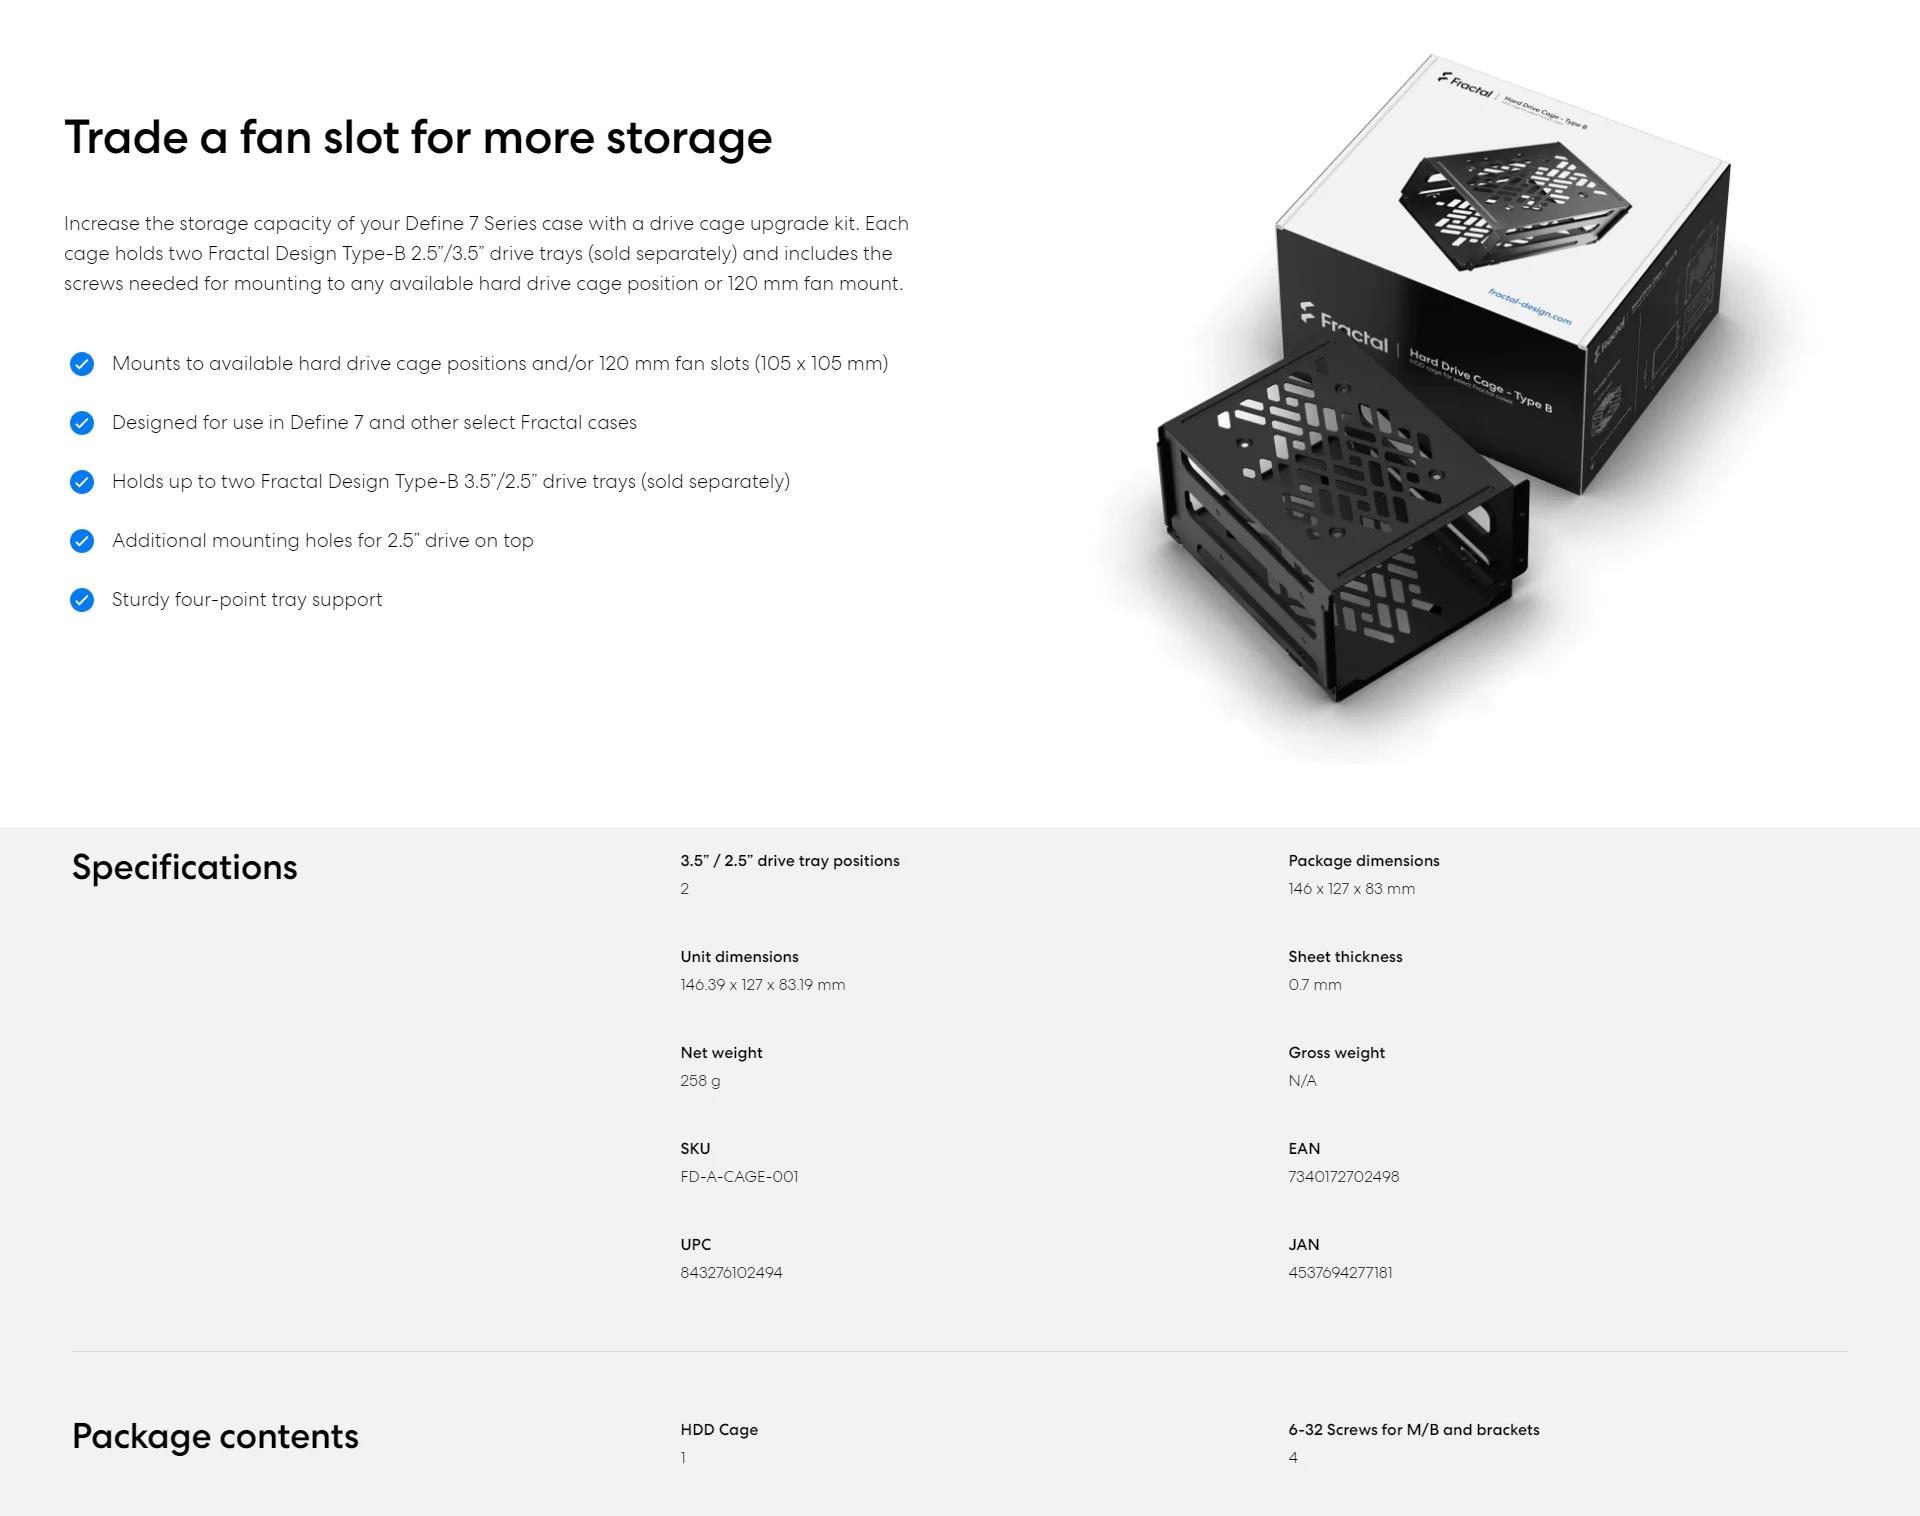 A large marketing image providing additional information about the product Fractal Design Hard Drive Cage Kit – Type B - Additional alt info not provided